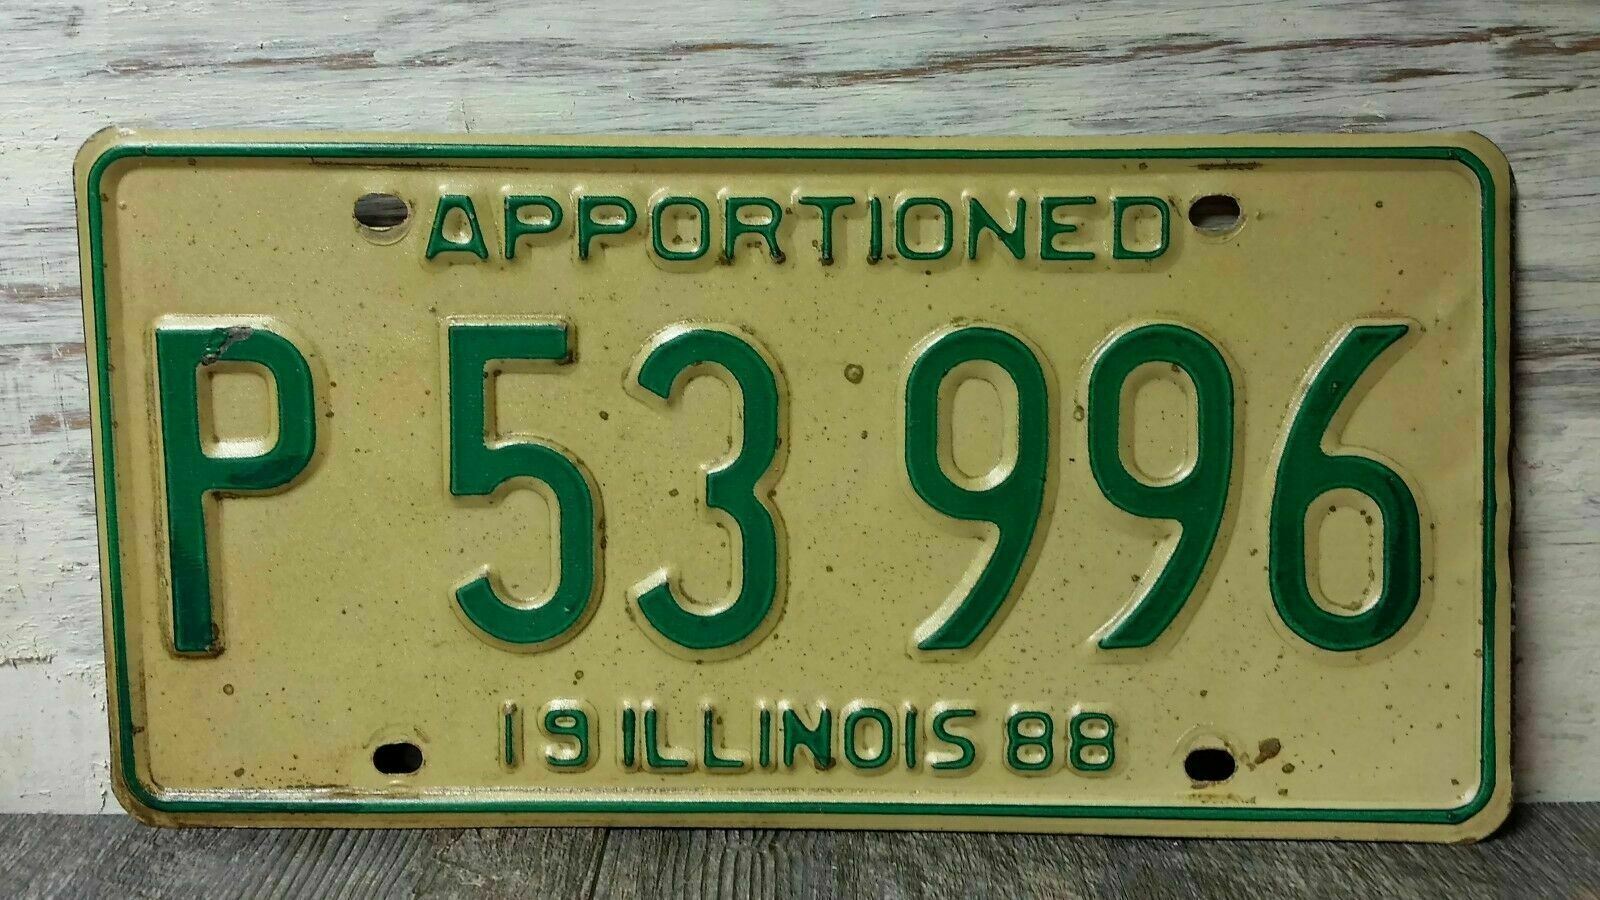 Vintage 1988 Green & White Illinois Apportioned License Plate P 53 996